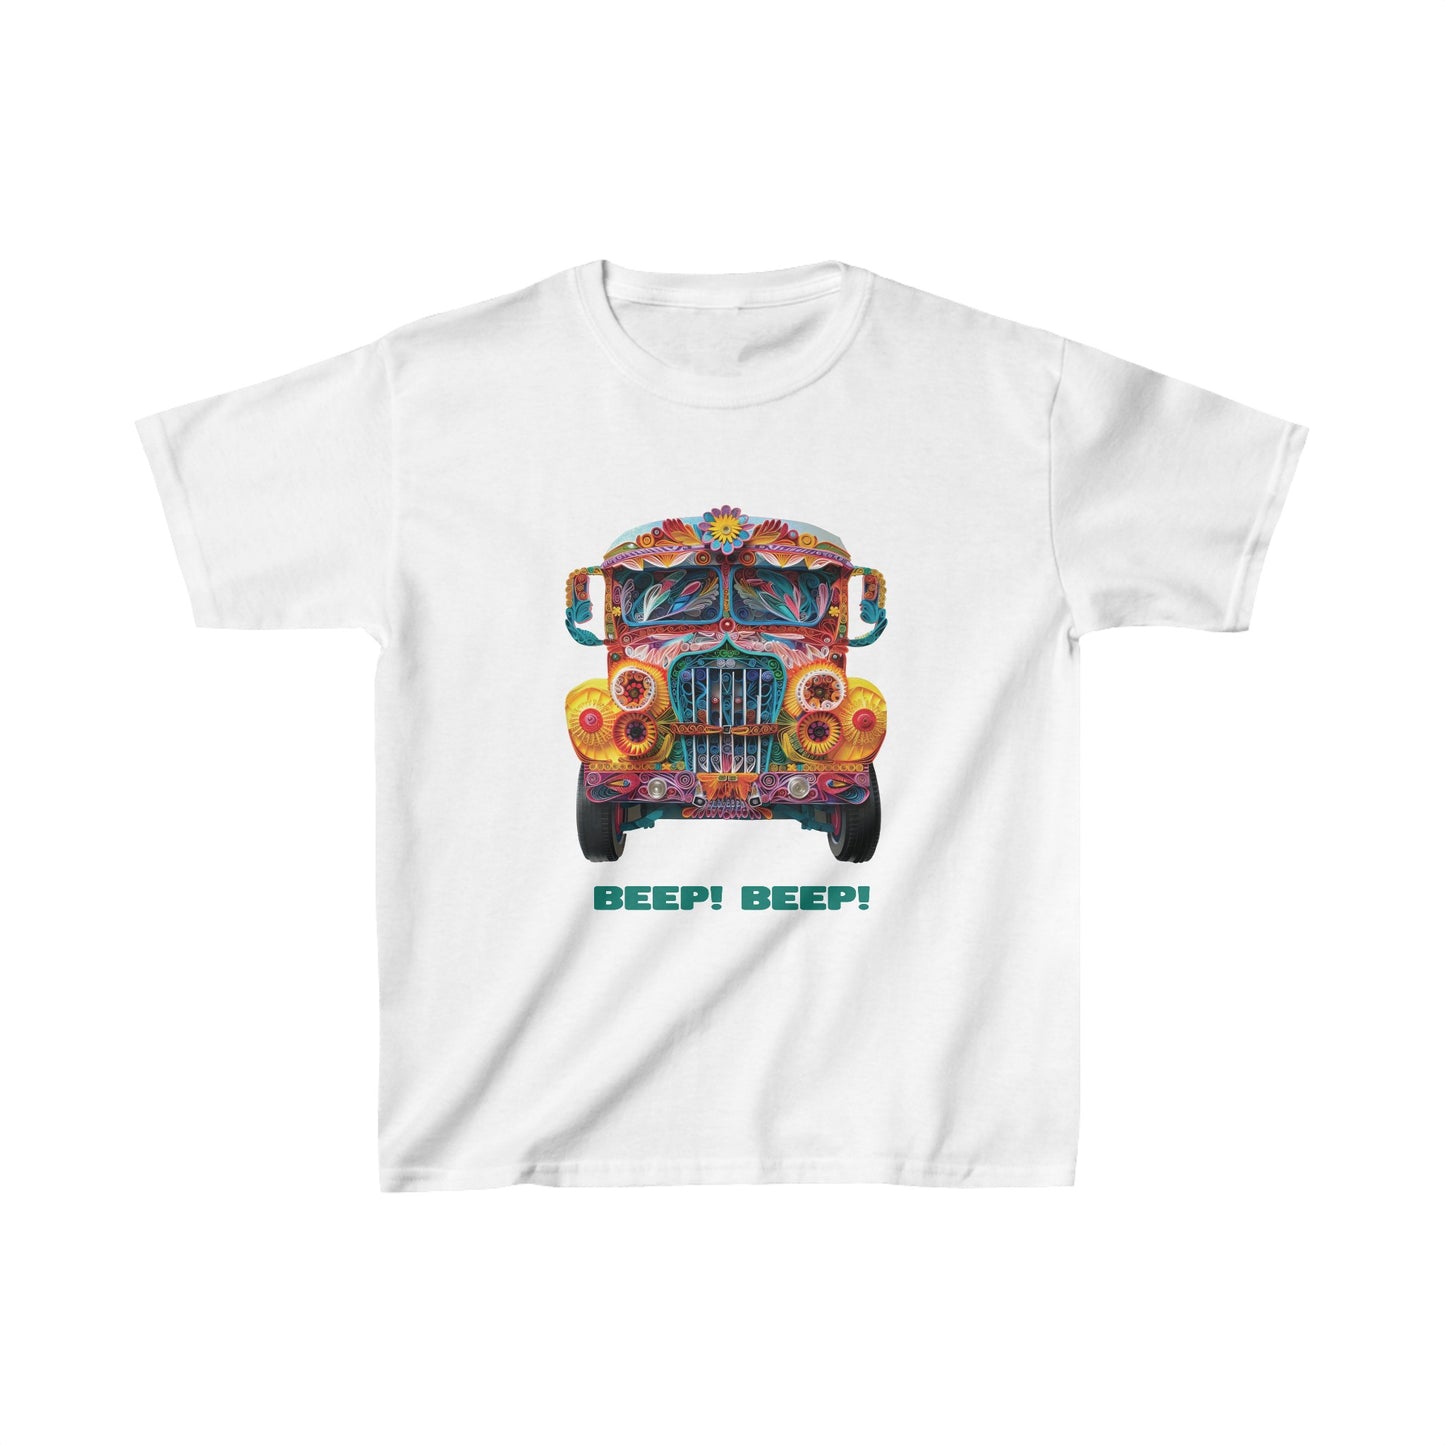 Elevate your kids' style with this Filipino clothing brand, fun graphic t-shirt for kids that is soft to the touch and a great choice for any season. A cultural icon that reflects the identity, values, and creativity of the Filipino people. Wear the Philippine jeepney with pride! Made with 100%, midweight, US cotton Soft to the touch and a great choice for any season Ribbed knit collar for curl resistance Fabric blends: Heather colors - 50% cotton, 50% polyester, Sport Grey - 90% cotton, 10% polyester